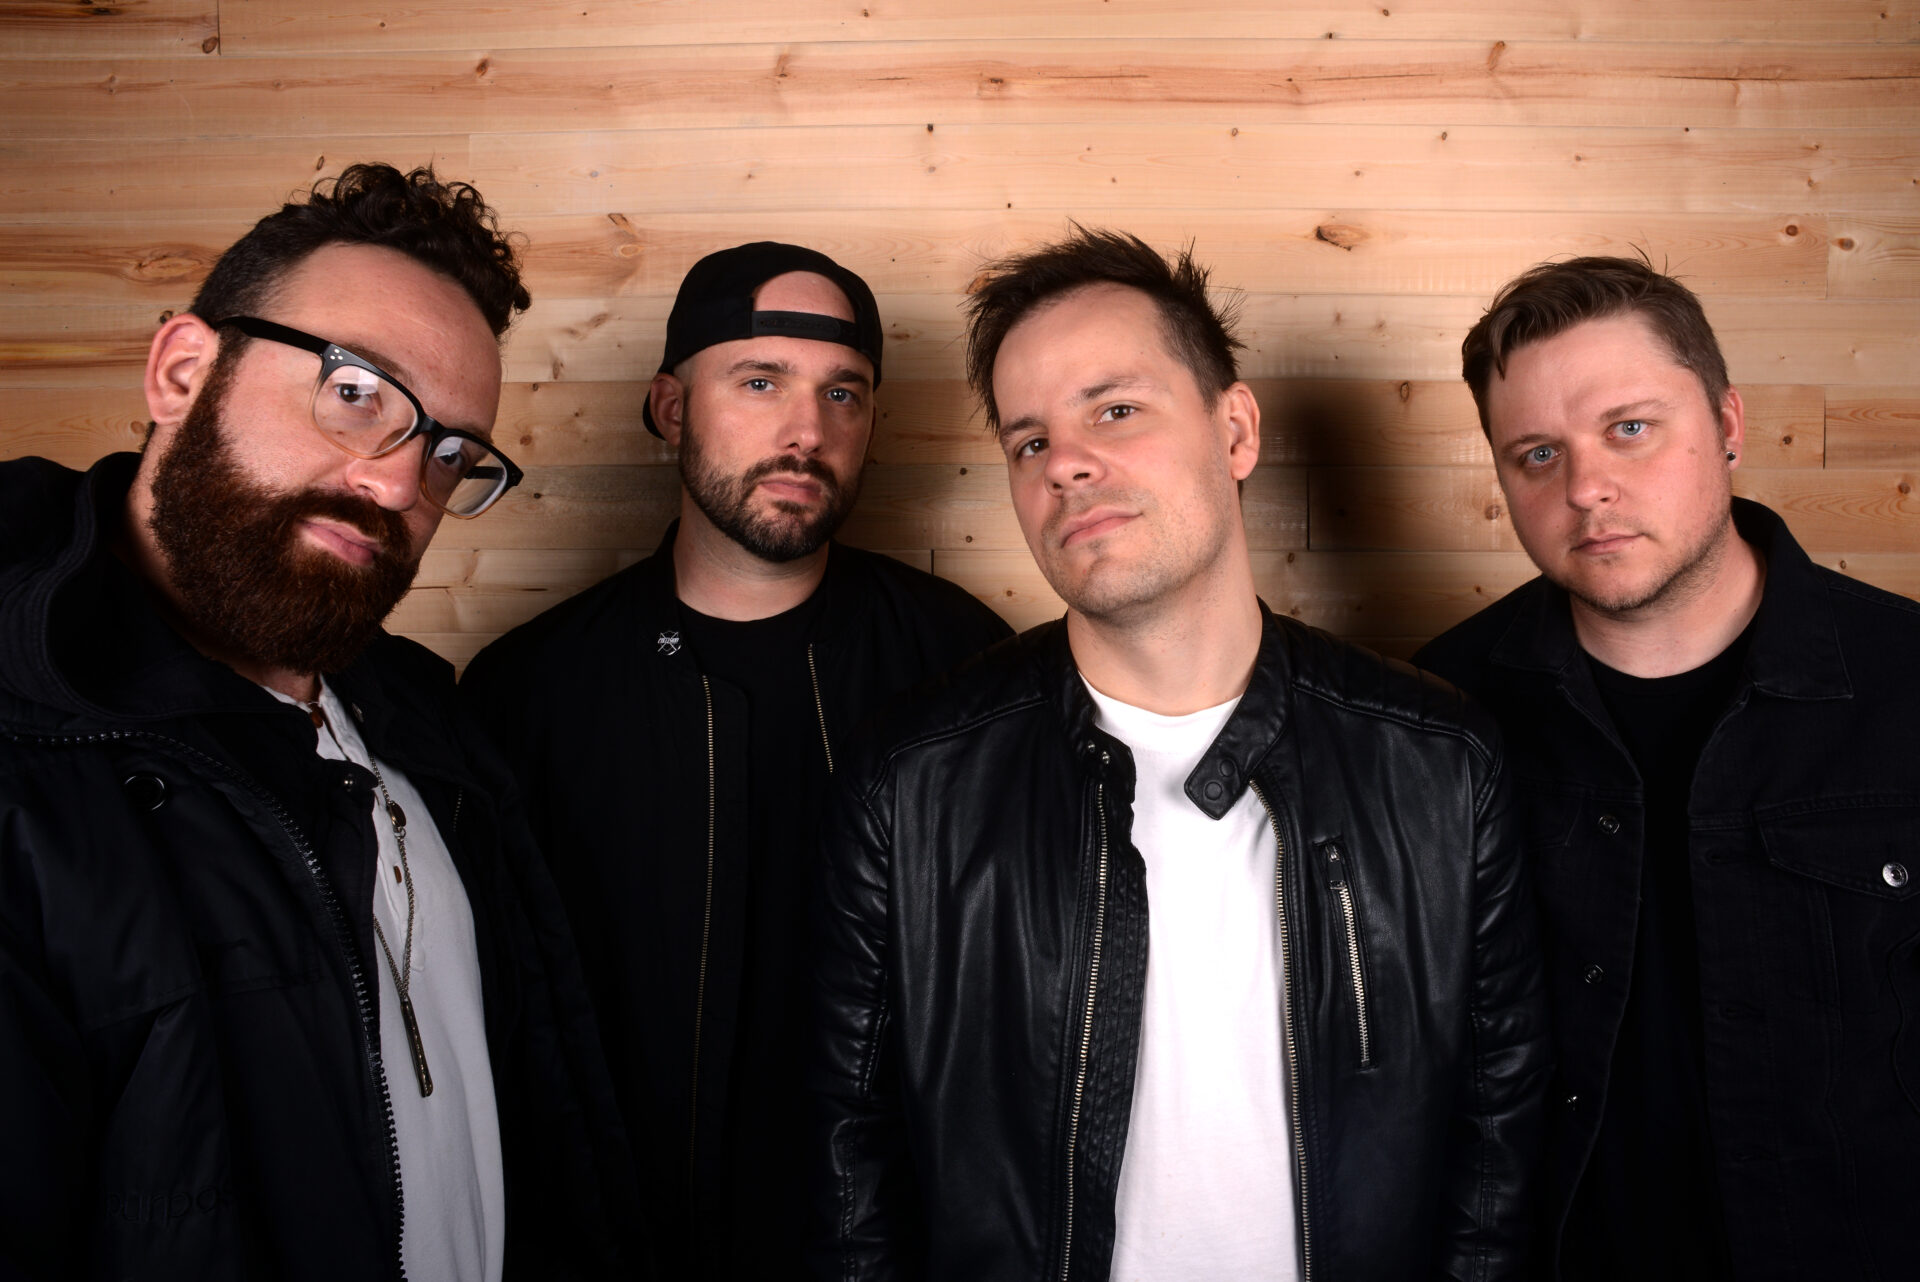 We Are the Movies release new single, “Bury Me” feat. Oshie Bichar (Beartooth, City Lights)